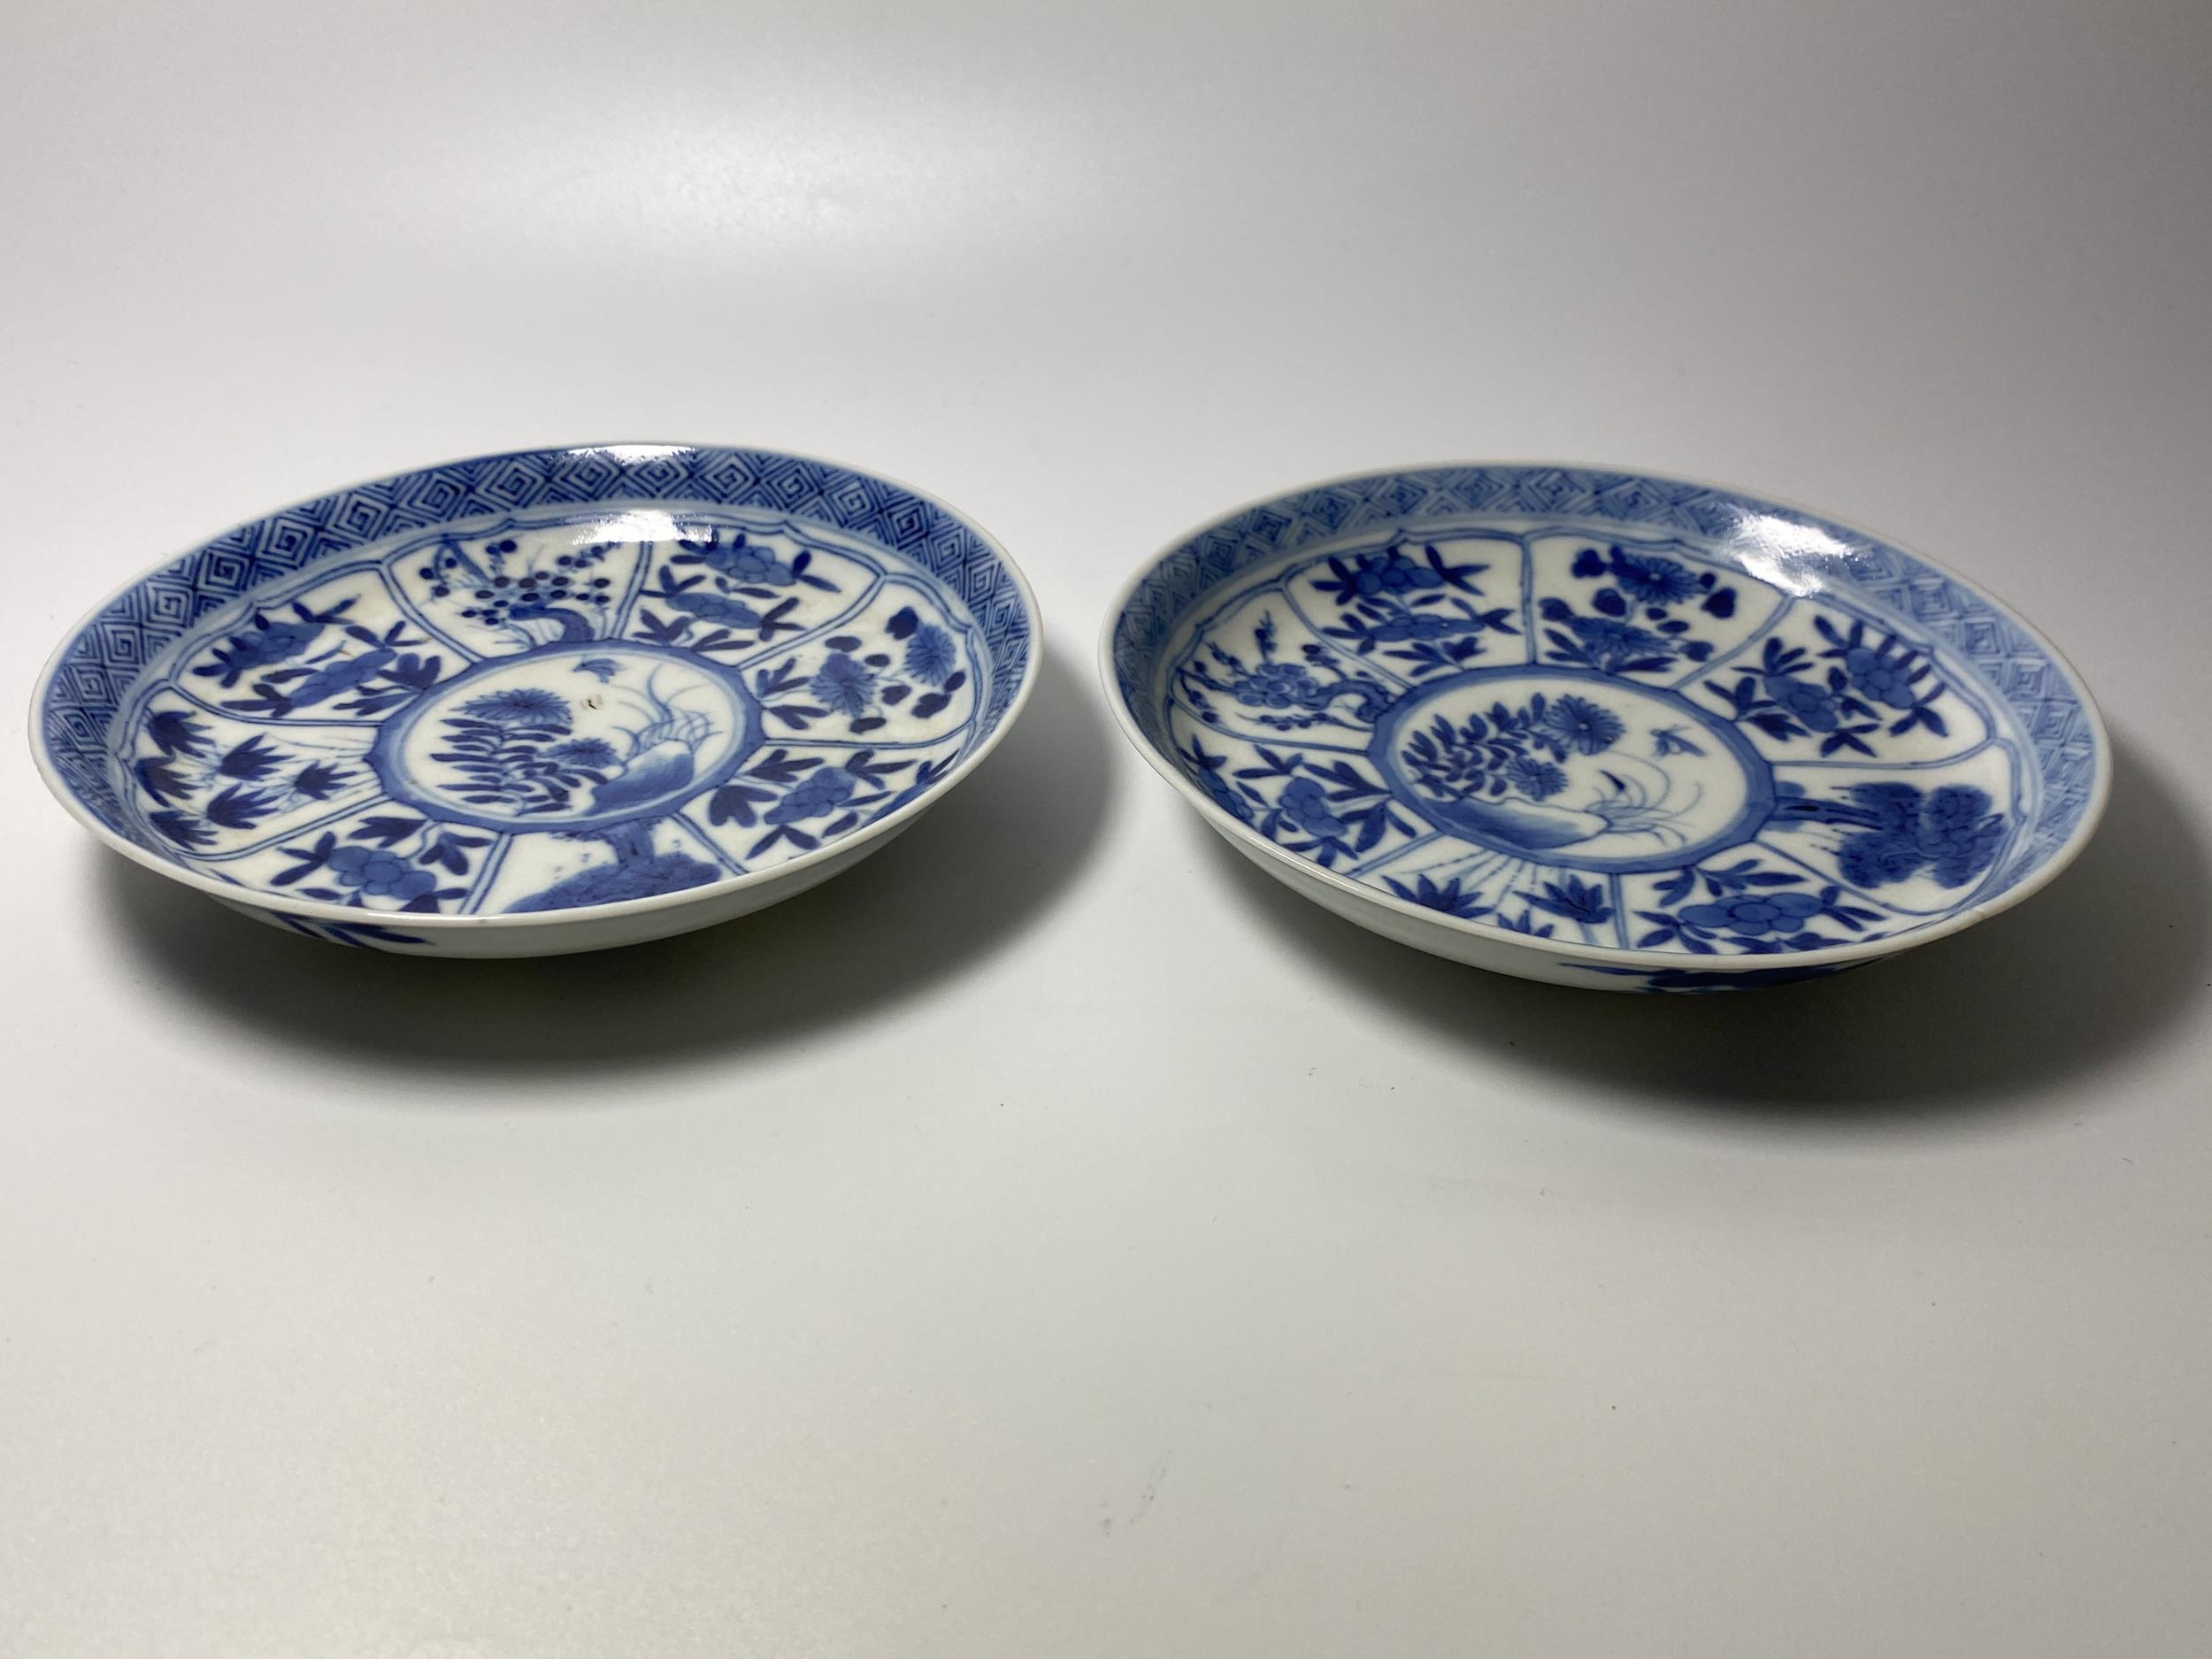 A PAIR OF KANGXI PERIOD (1661-1722) CHINESE BLUE AND WHITE PORCELAIN PLATES, ARTEMESIA LEAF MARK - Image 6 of 13